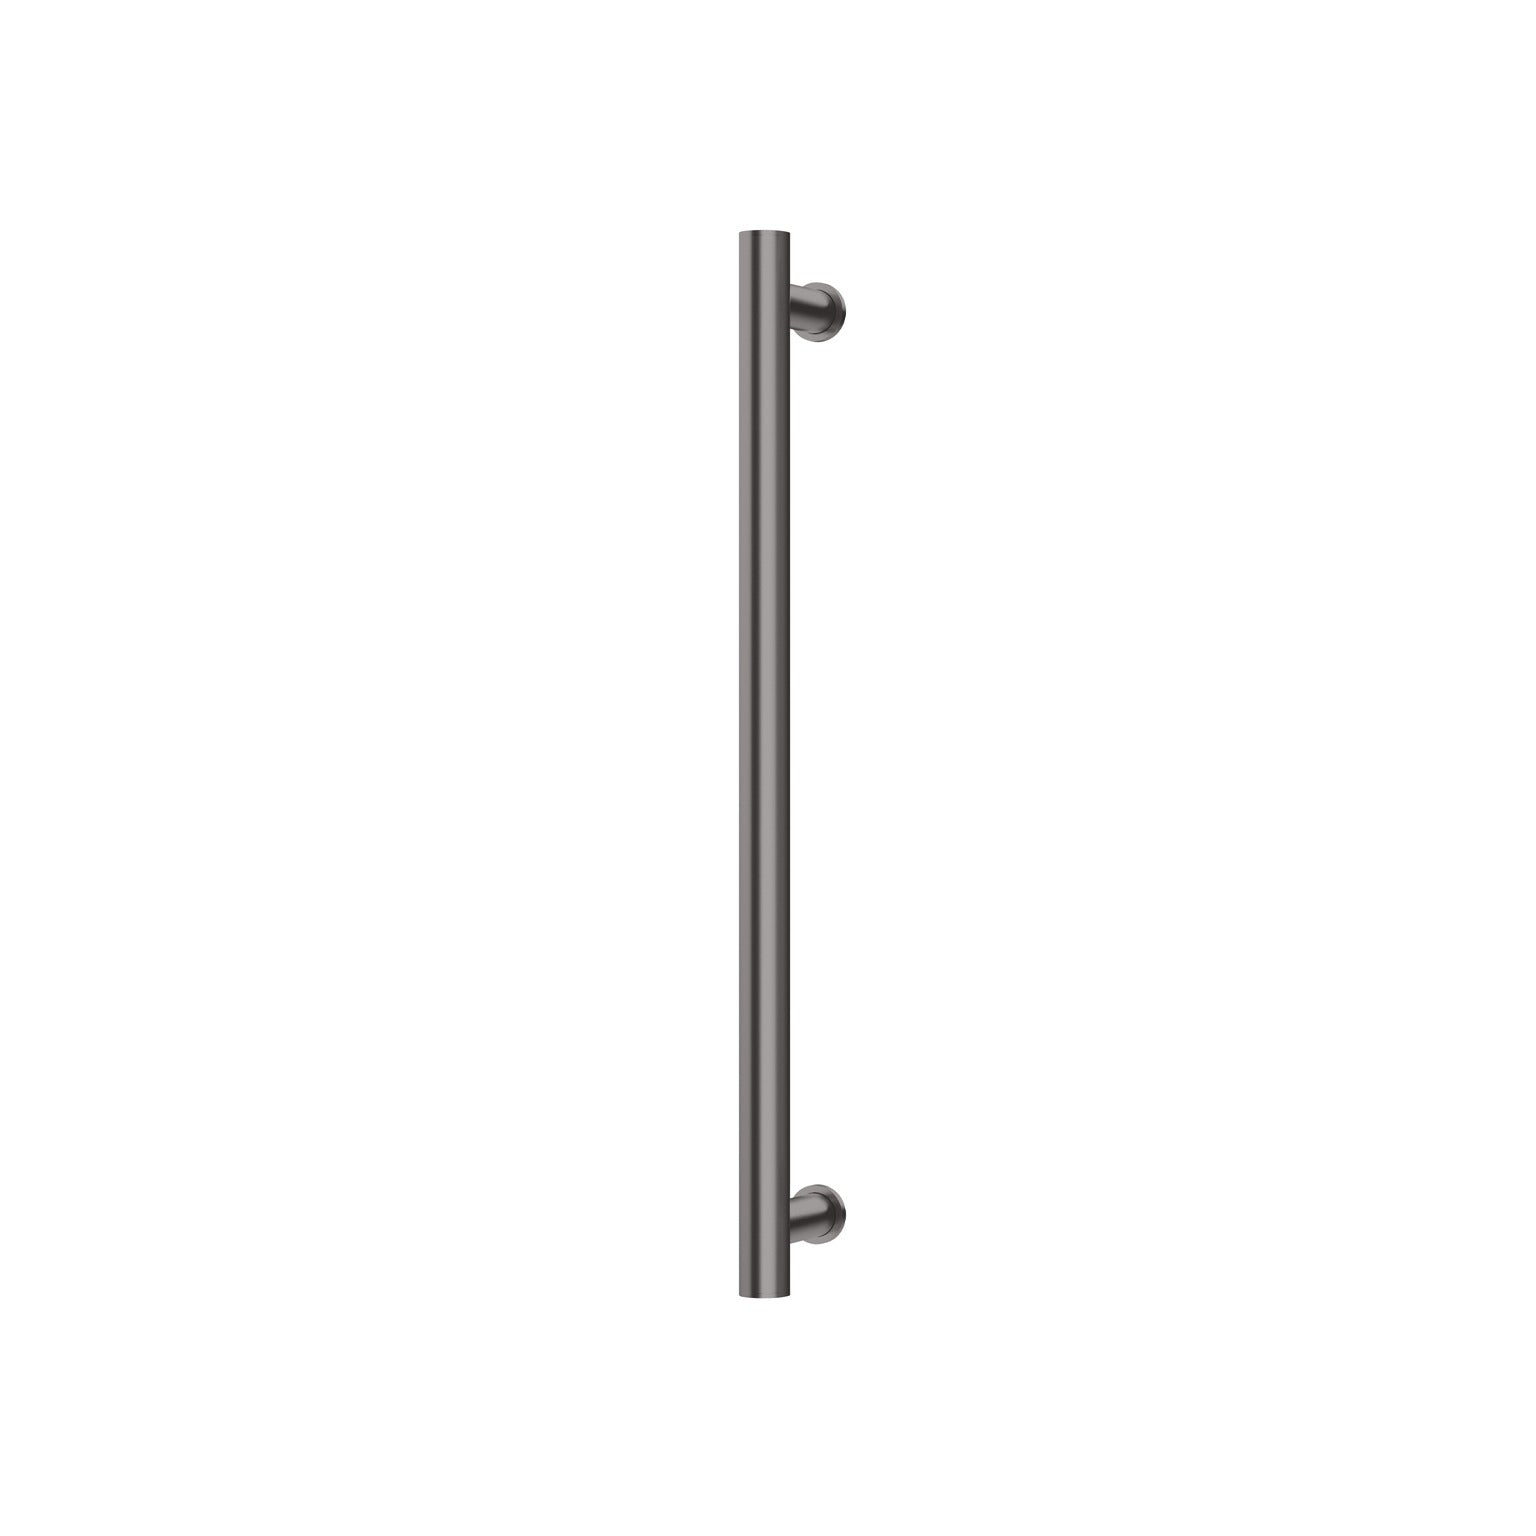 PHOENIX ROUND SINGLE HEATED TOWEL RAIL BRUSHED CARBON (AVAILABLE IN 600MM AND 800MM)